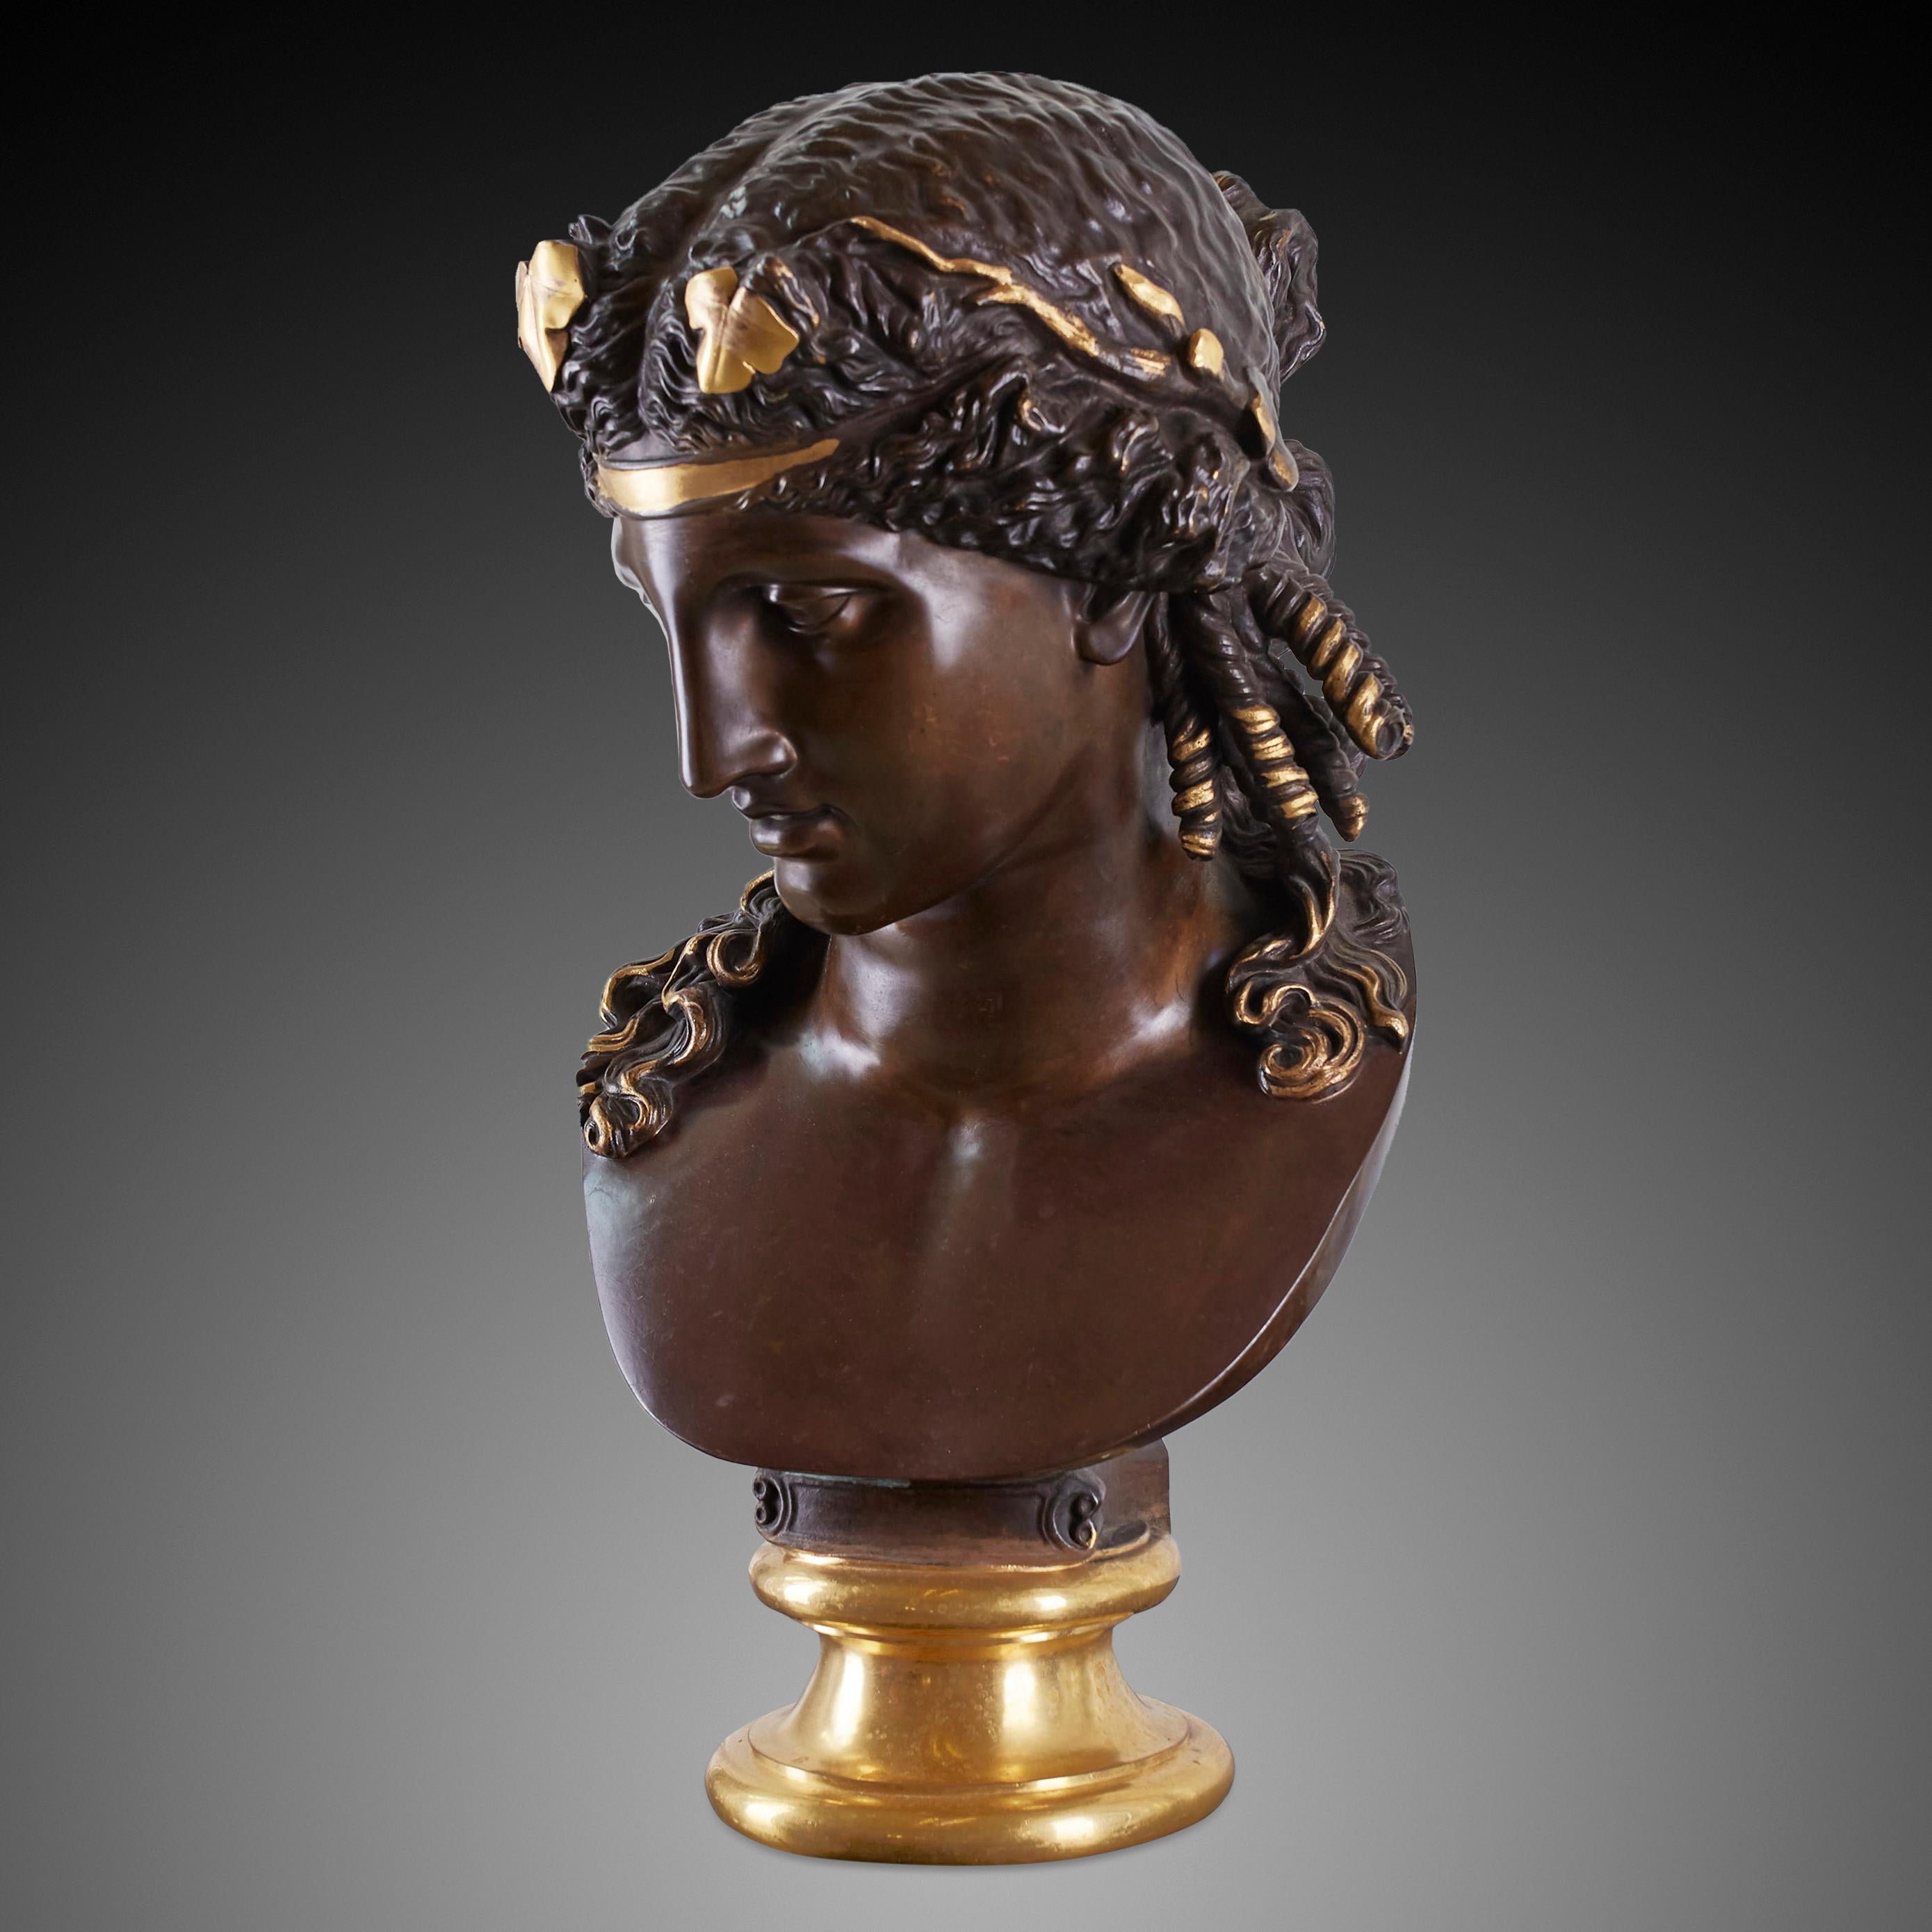 A French patinated bronze bust of Ariadne by F. Barbedienne. The fine ‘reduction a colis’ is modeled after Bertel Thorvaldsen (c. 1805-1810). This sole bust is often paired with a famous antique bust of Antinous which is now in the Fitzwilliam